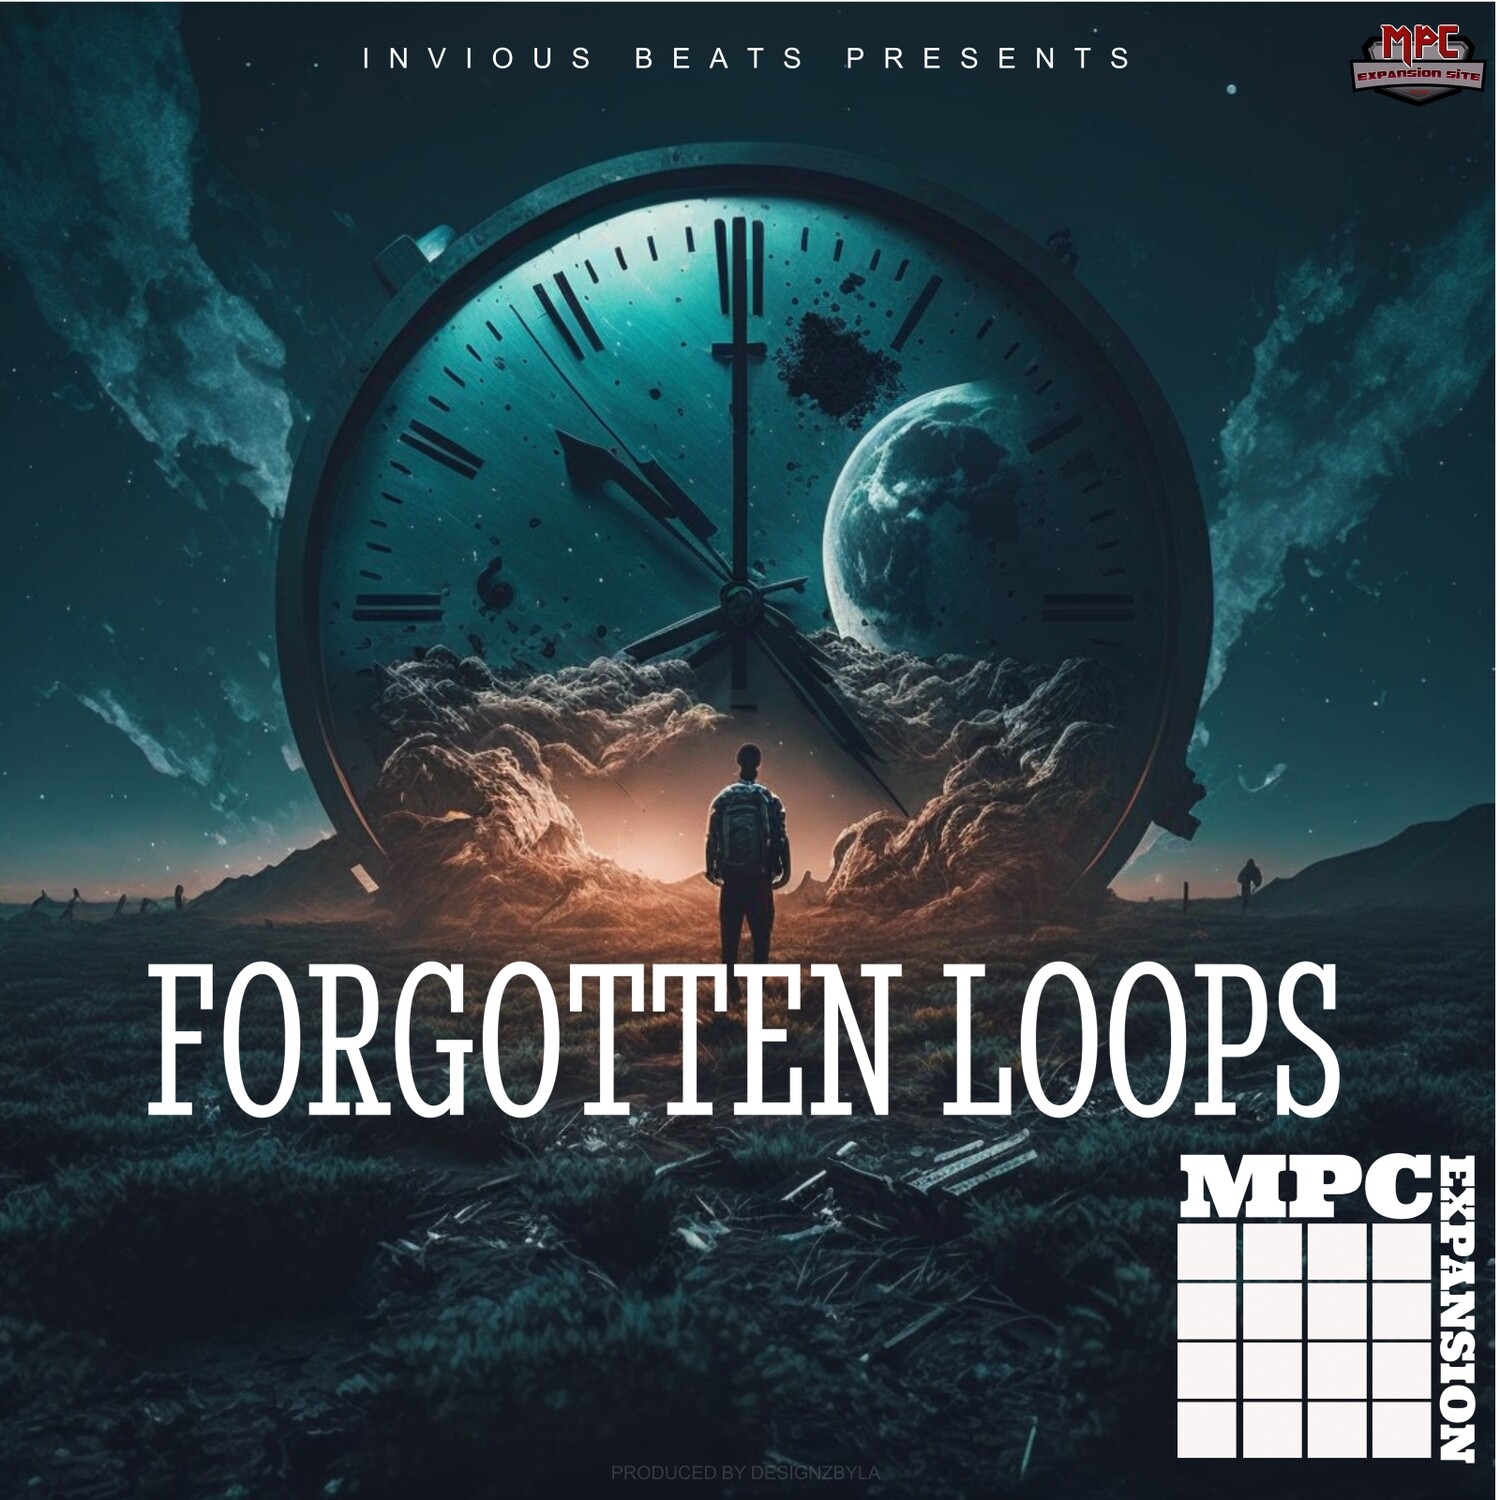 MPC EXPANSION 'FORGOTTEN LOOPS' by INVIOUS